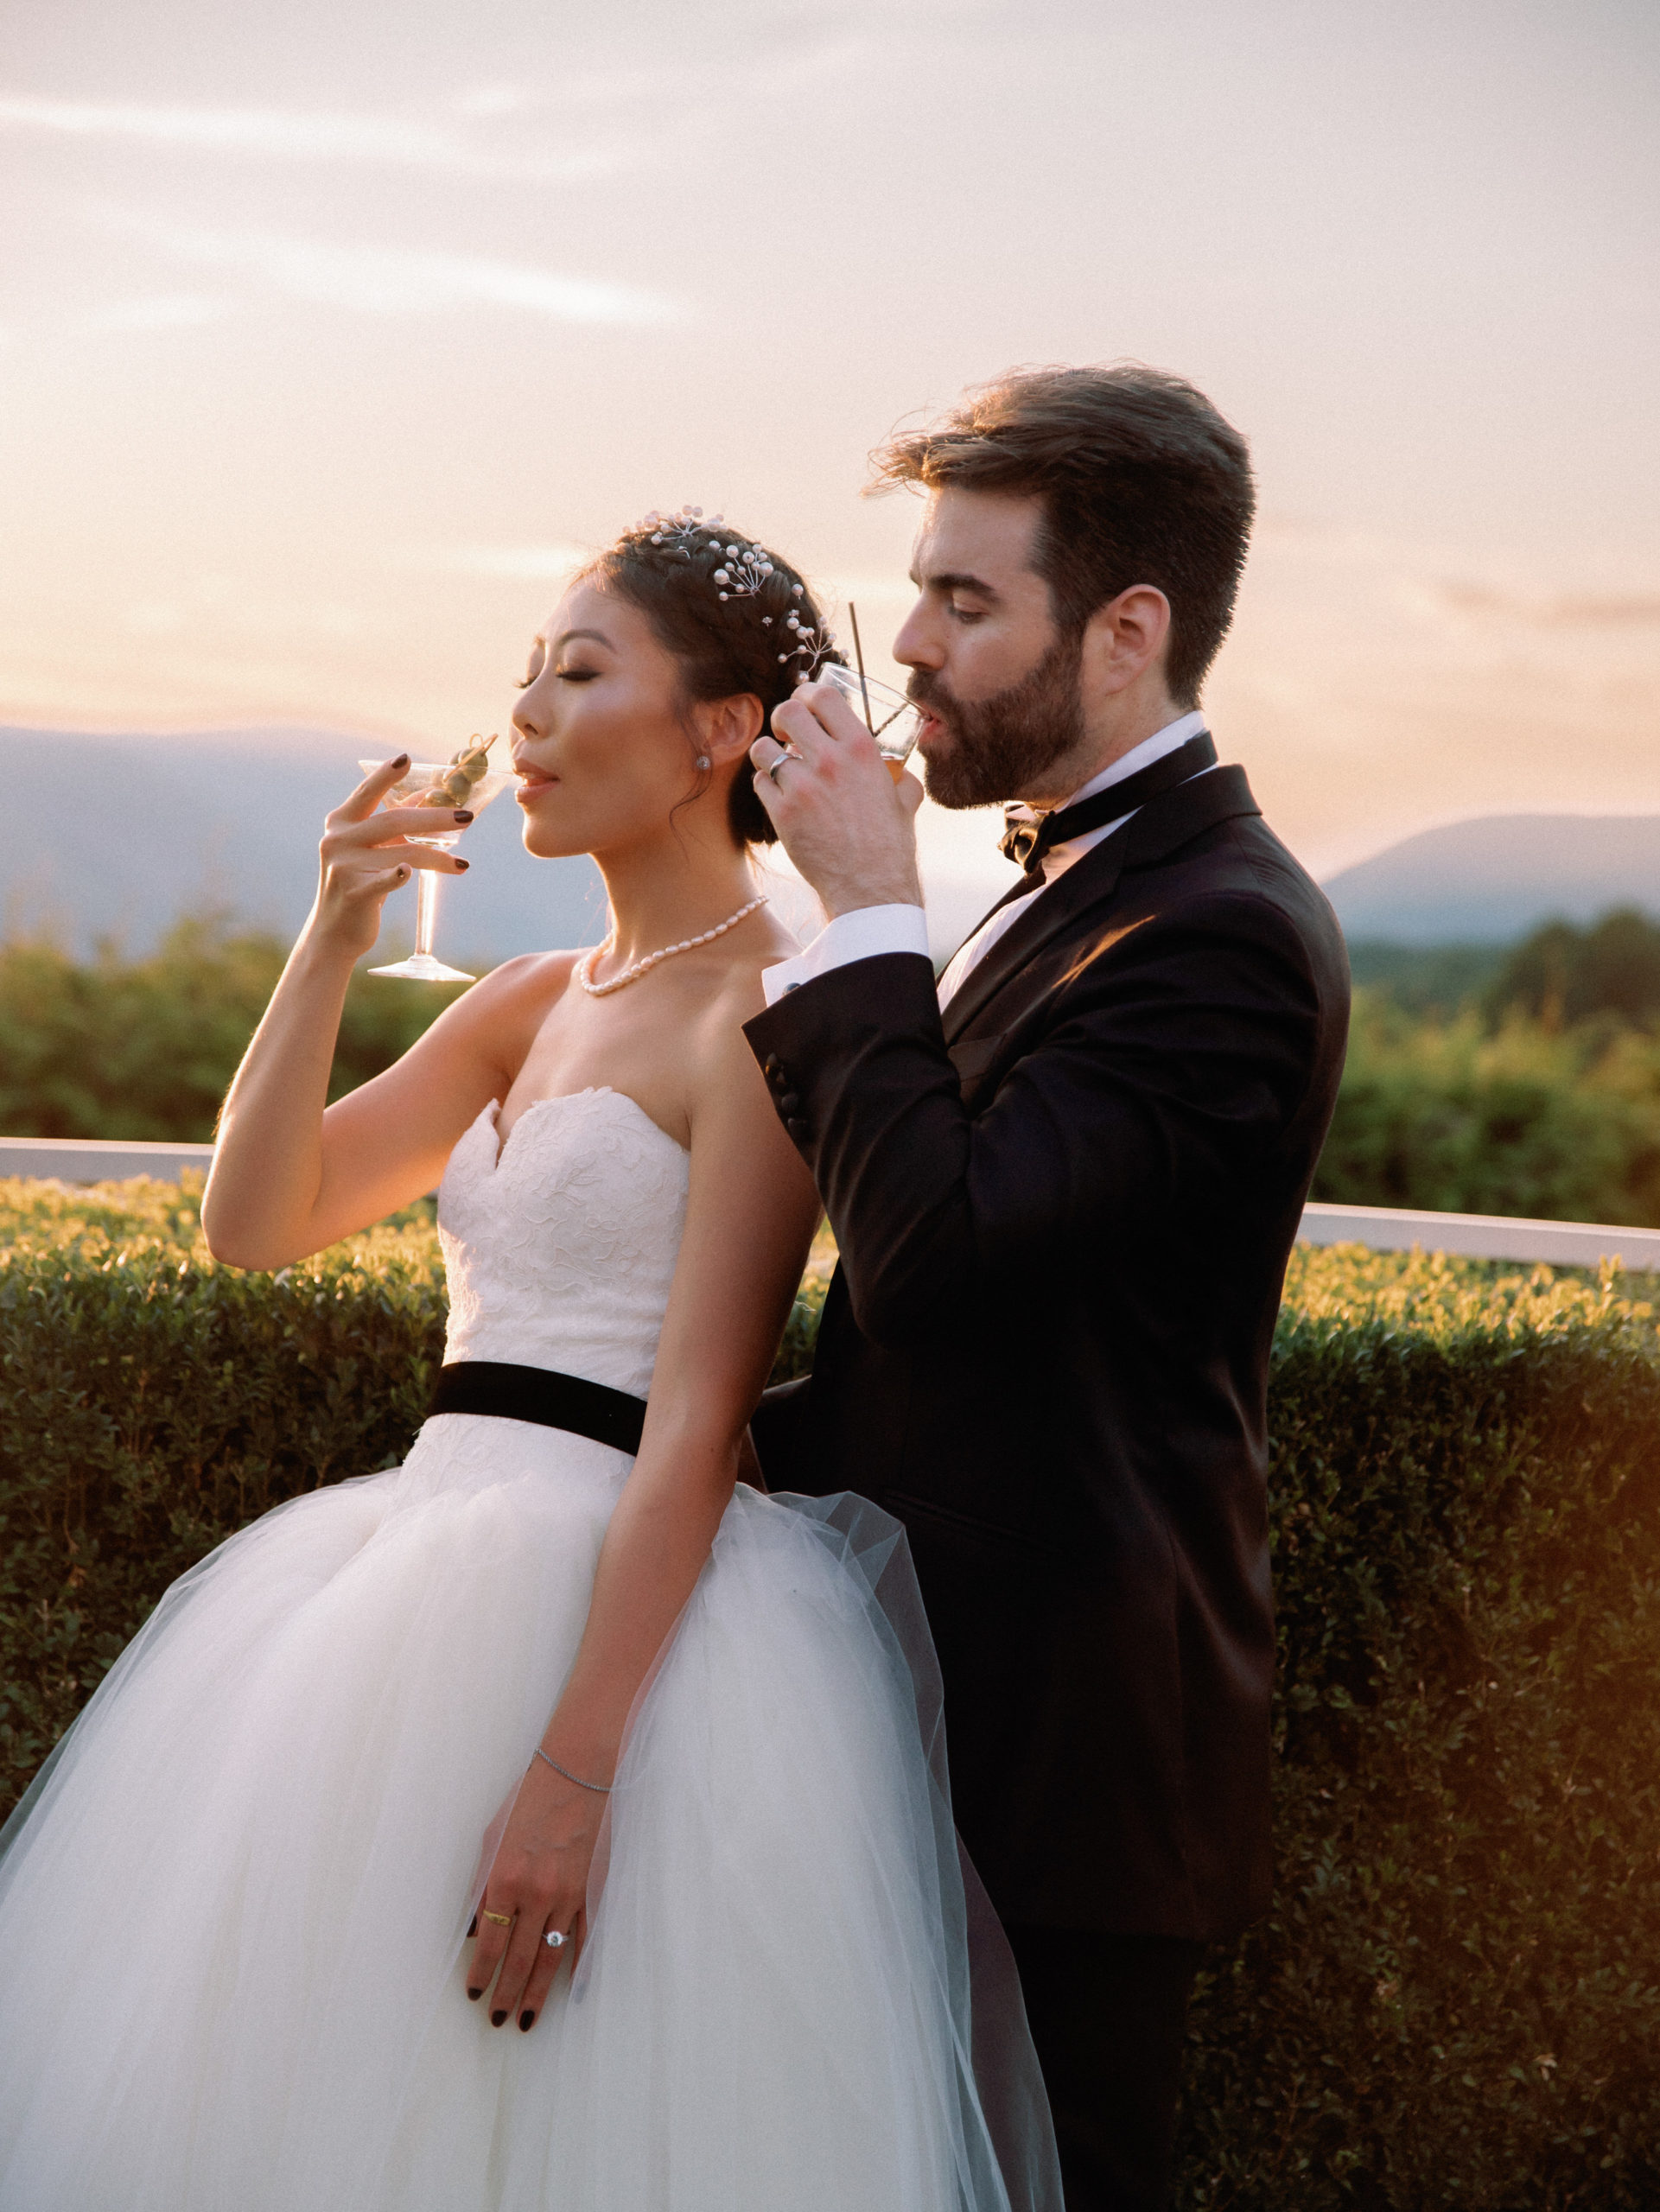 The newlyweds are sipping champagne. Destination wedding rules image by Jenny Fu Studio